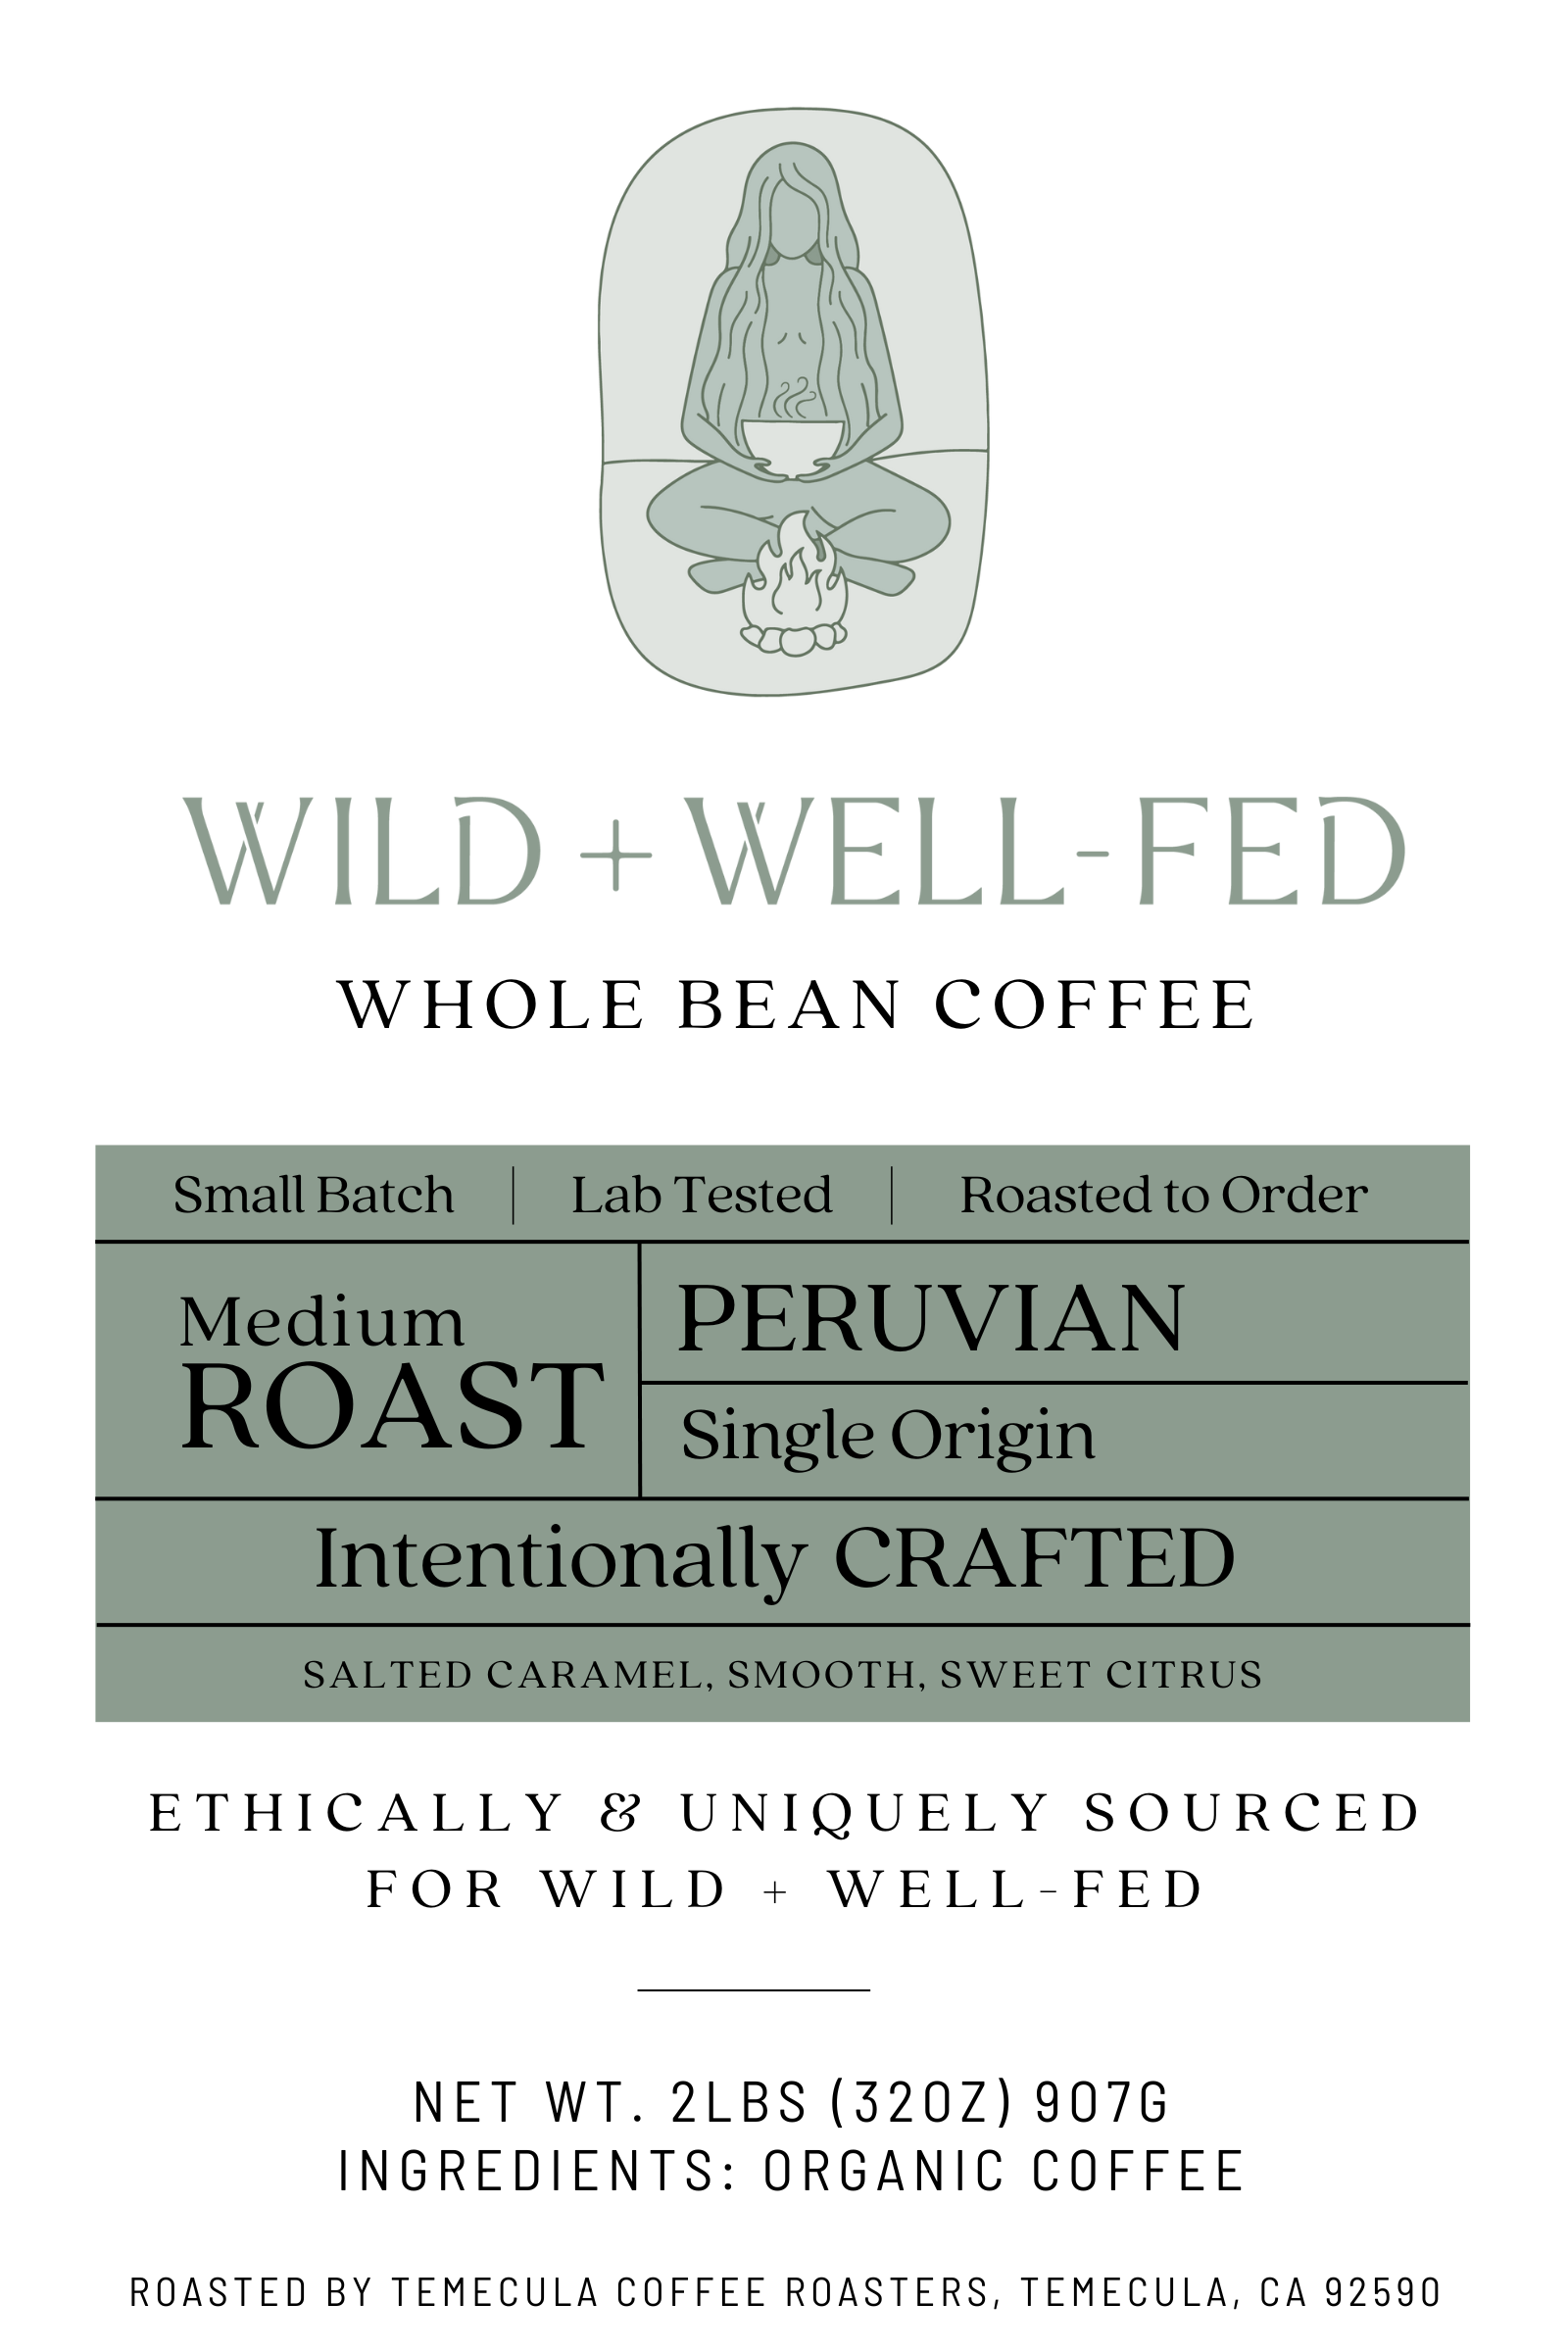 Close up image of label for Whole Bean Coffee from Peru